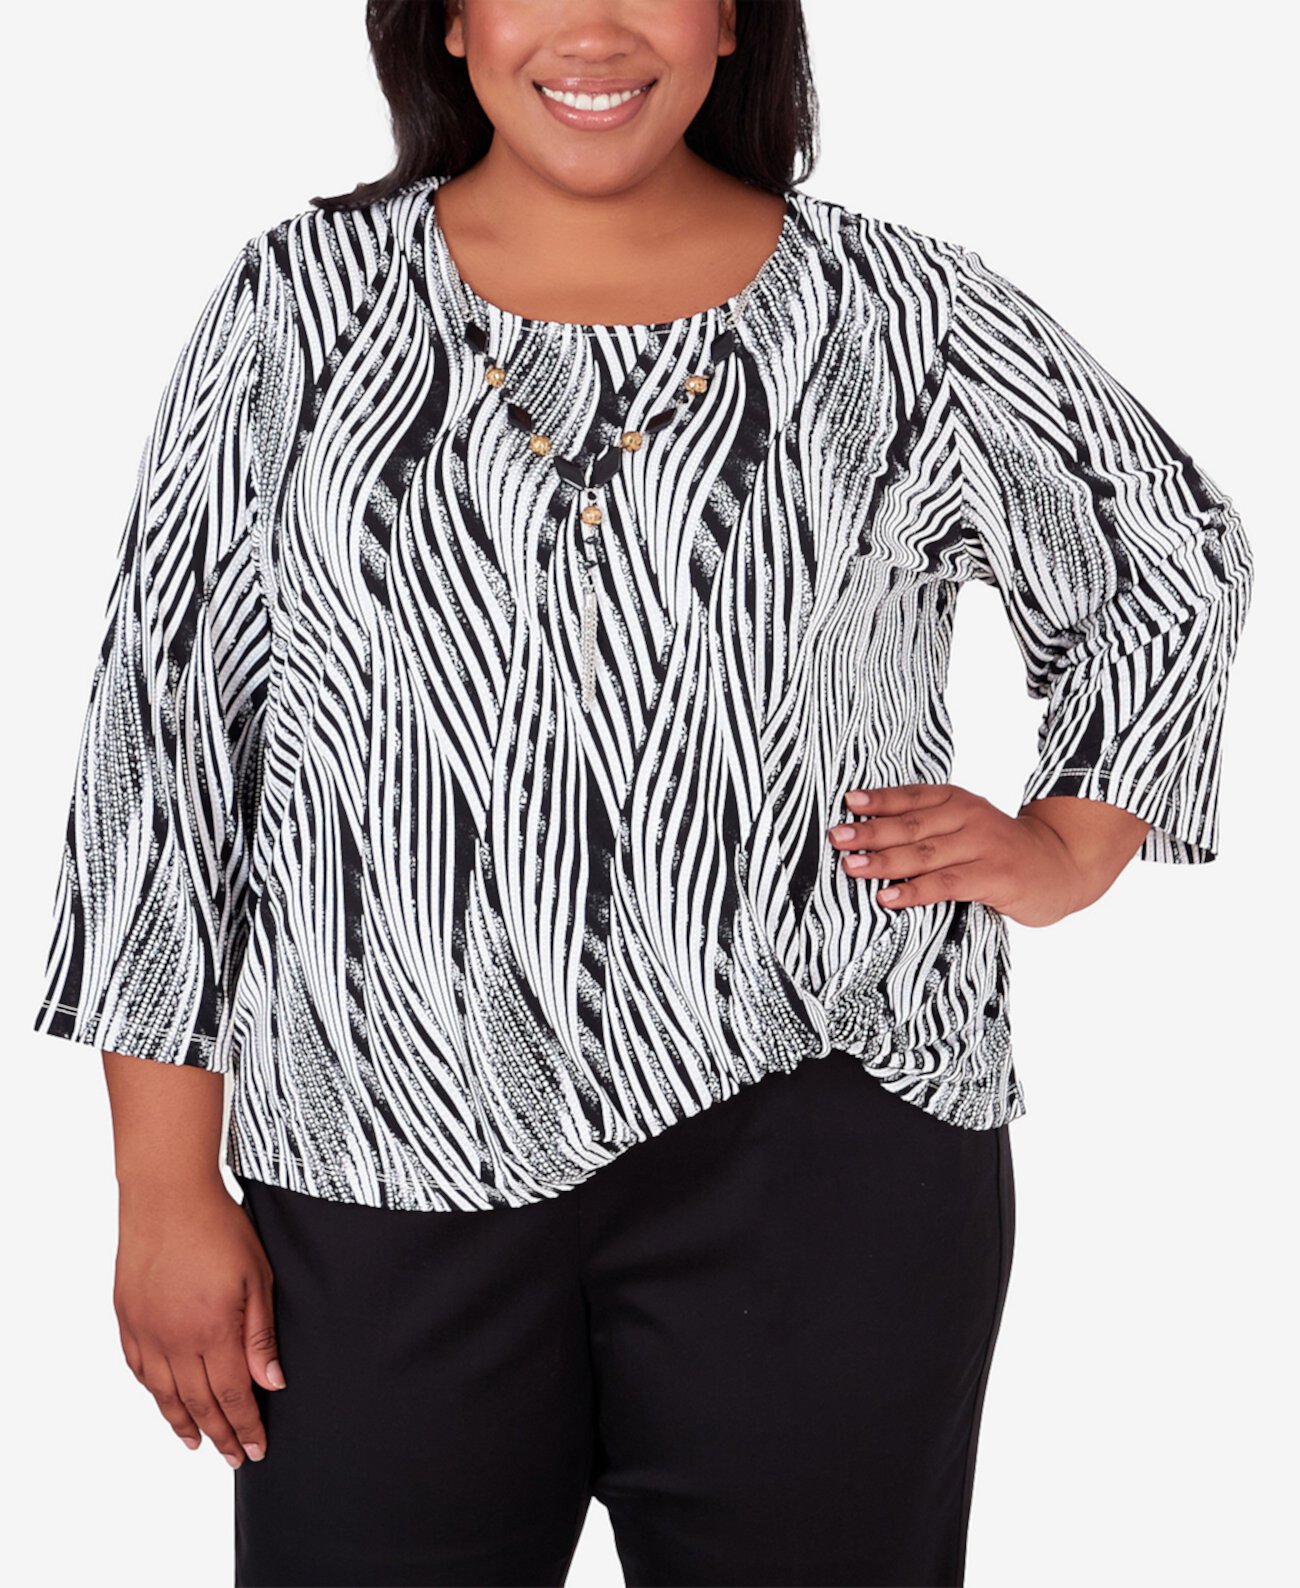 Plus Size Opposites Attract Swirl Top with Necklace Alfred Dunner